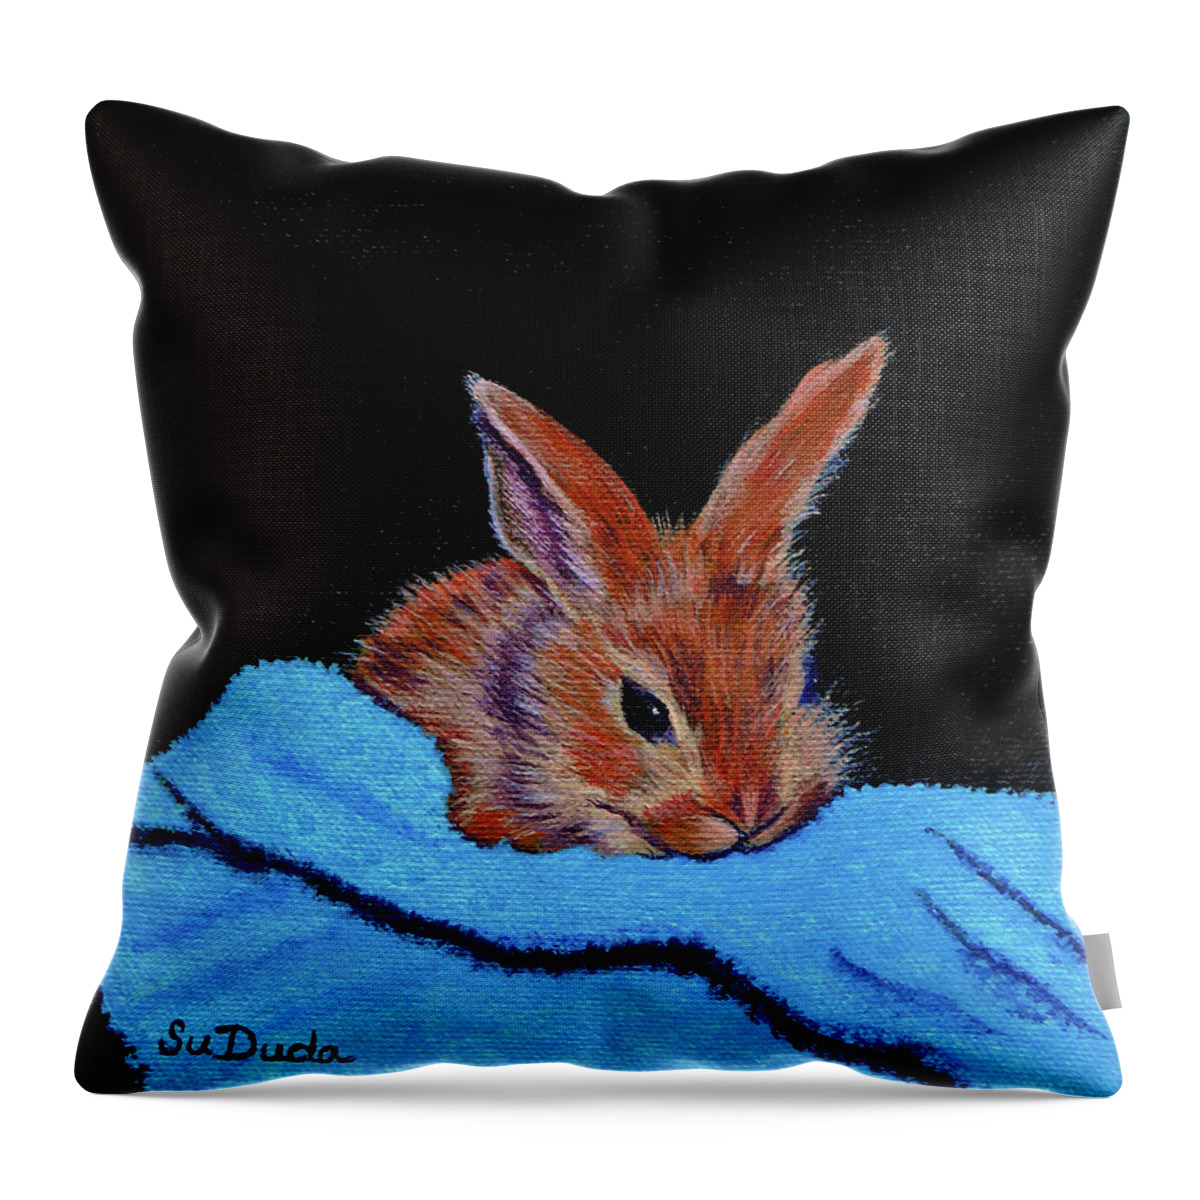 Butterscotch Bunny Throw Pillow featuring the painting Butterscotch Bunny by Susan Duda